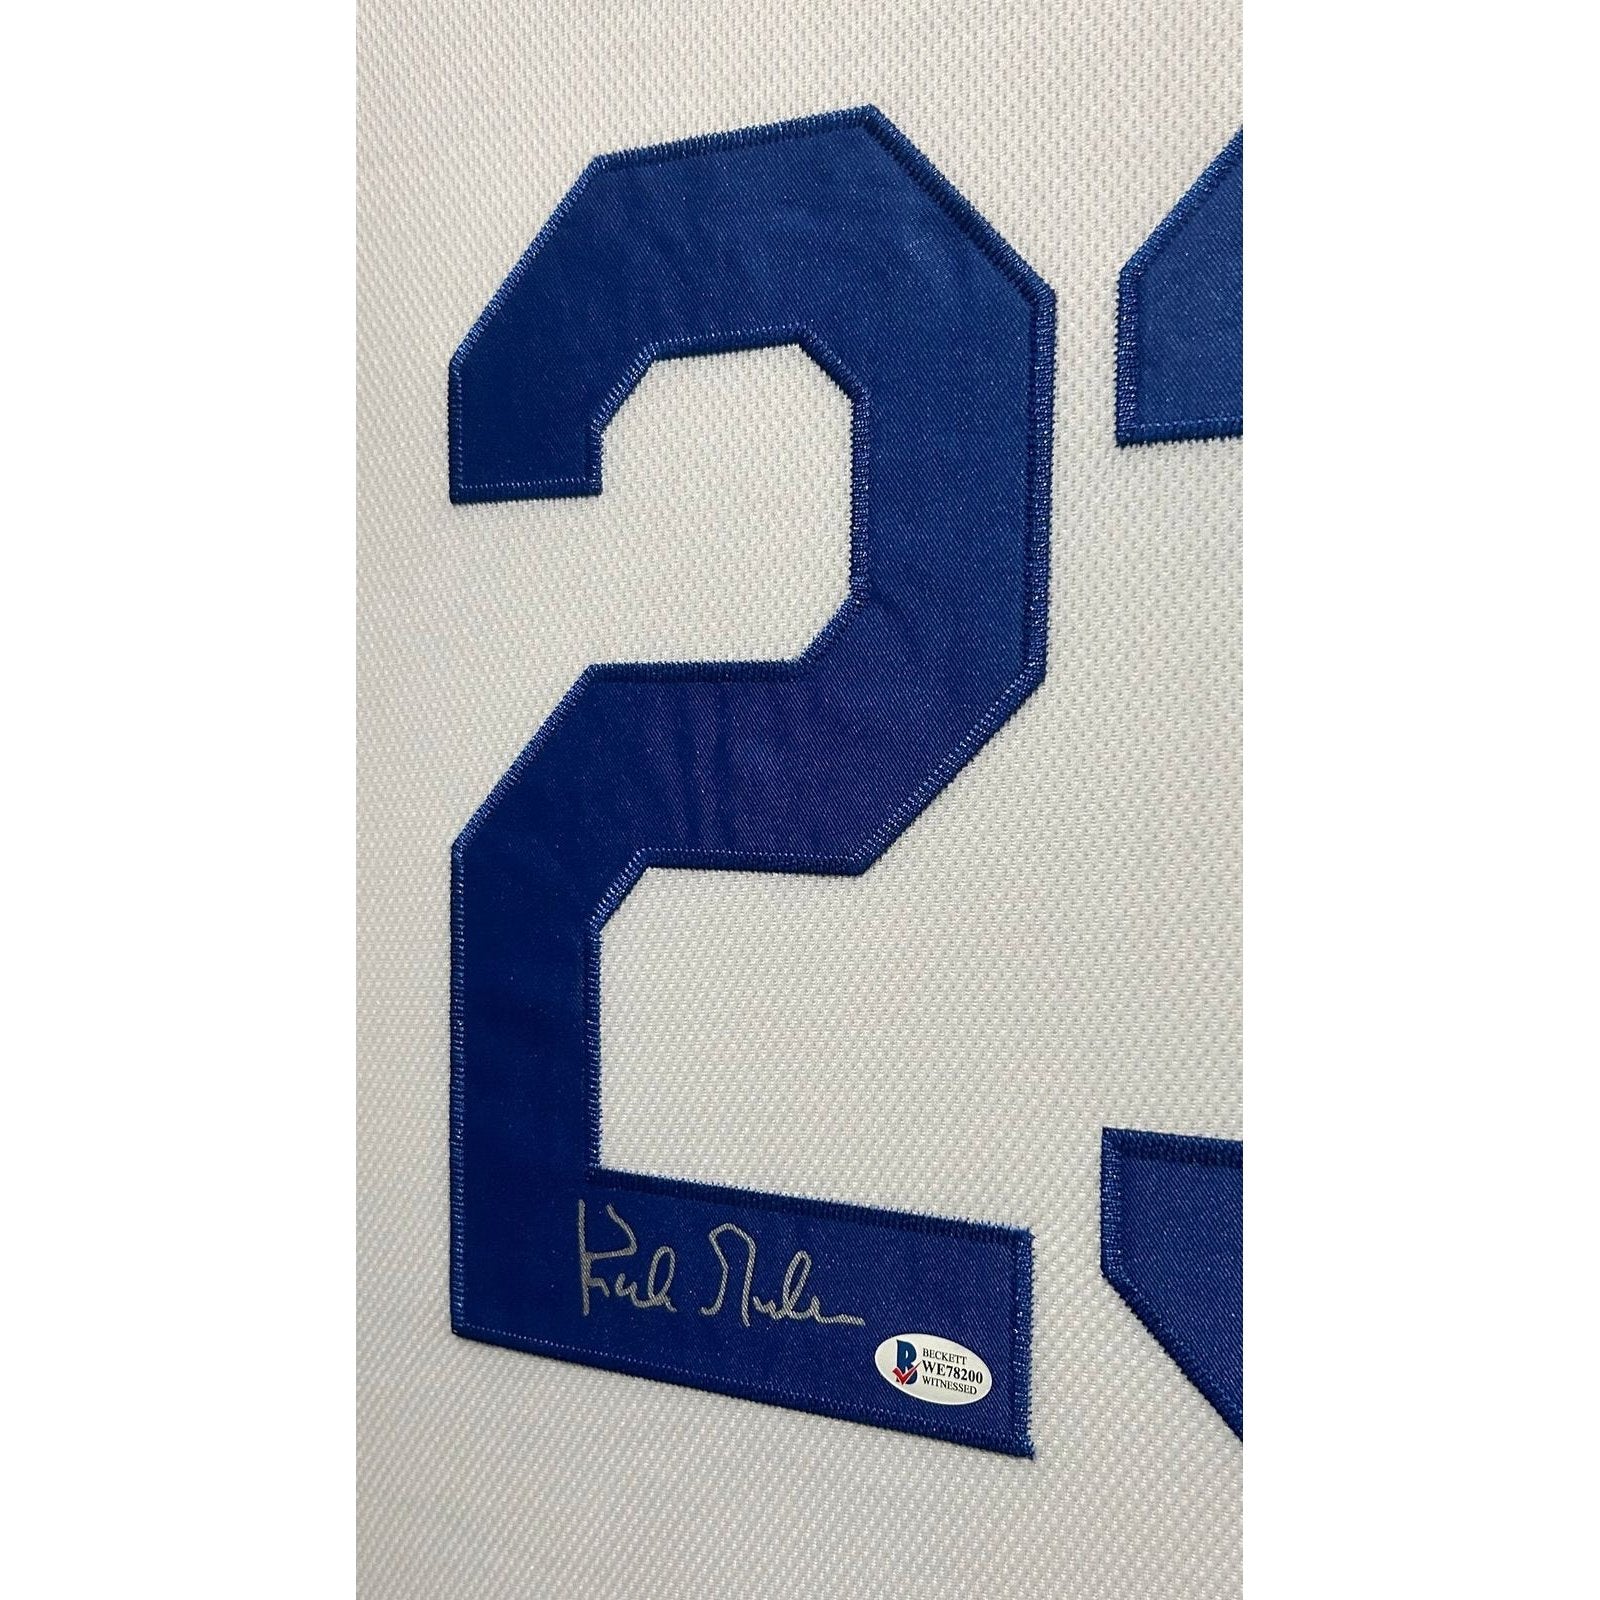 Kirk Gibson Autographed Los Angeles Dodgers Jersey - Autographed